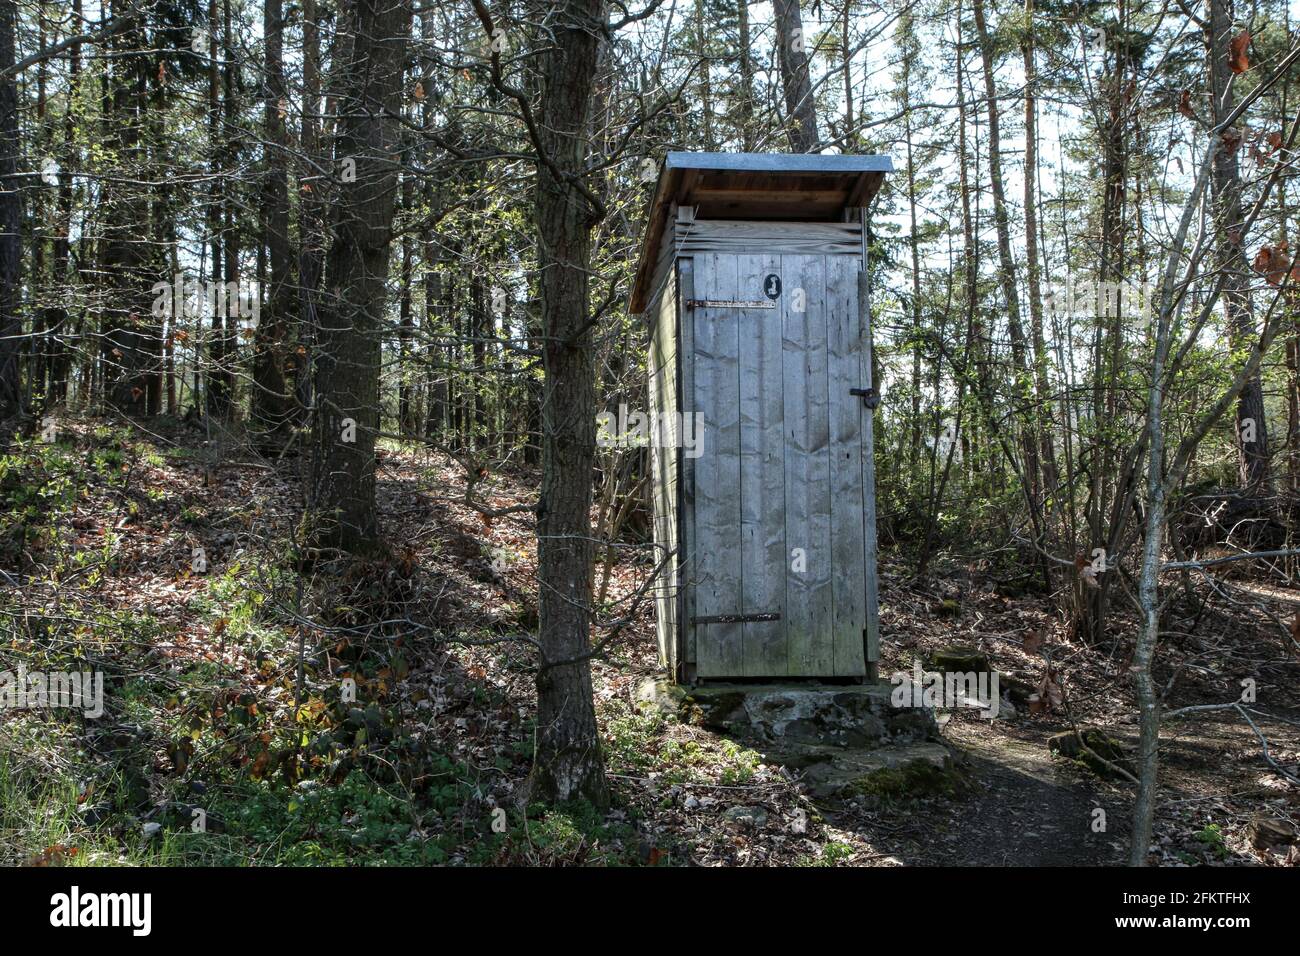 The rural wooden dry toilet standing in the wood by the cottages area. Stock Photo